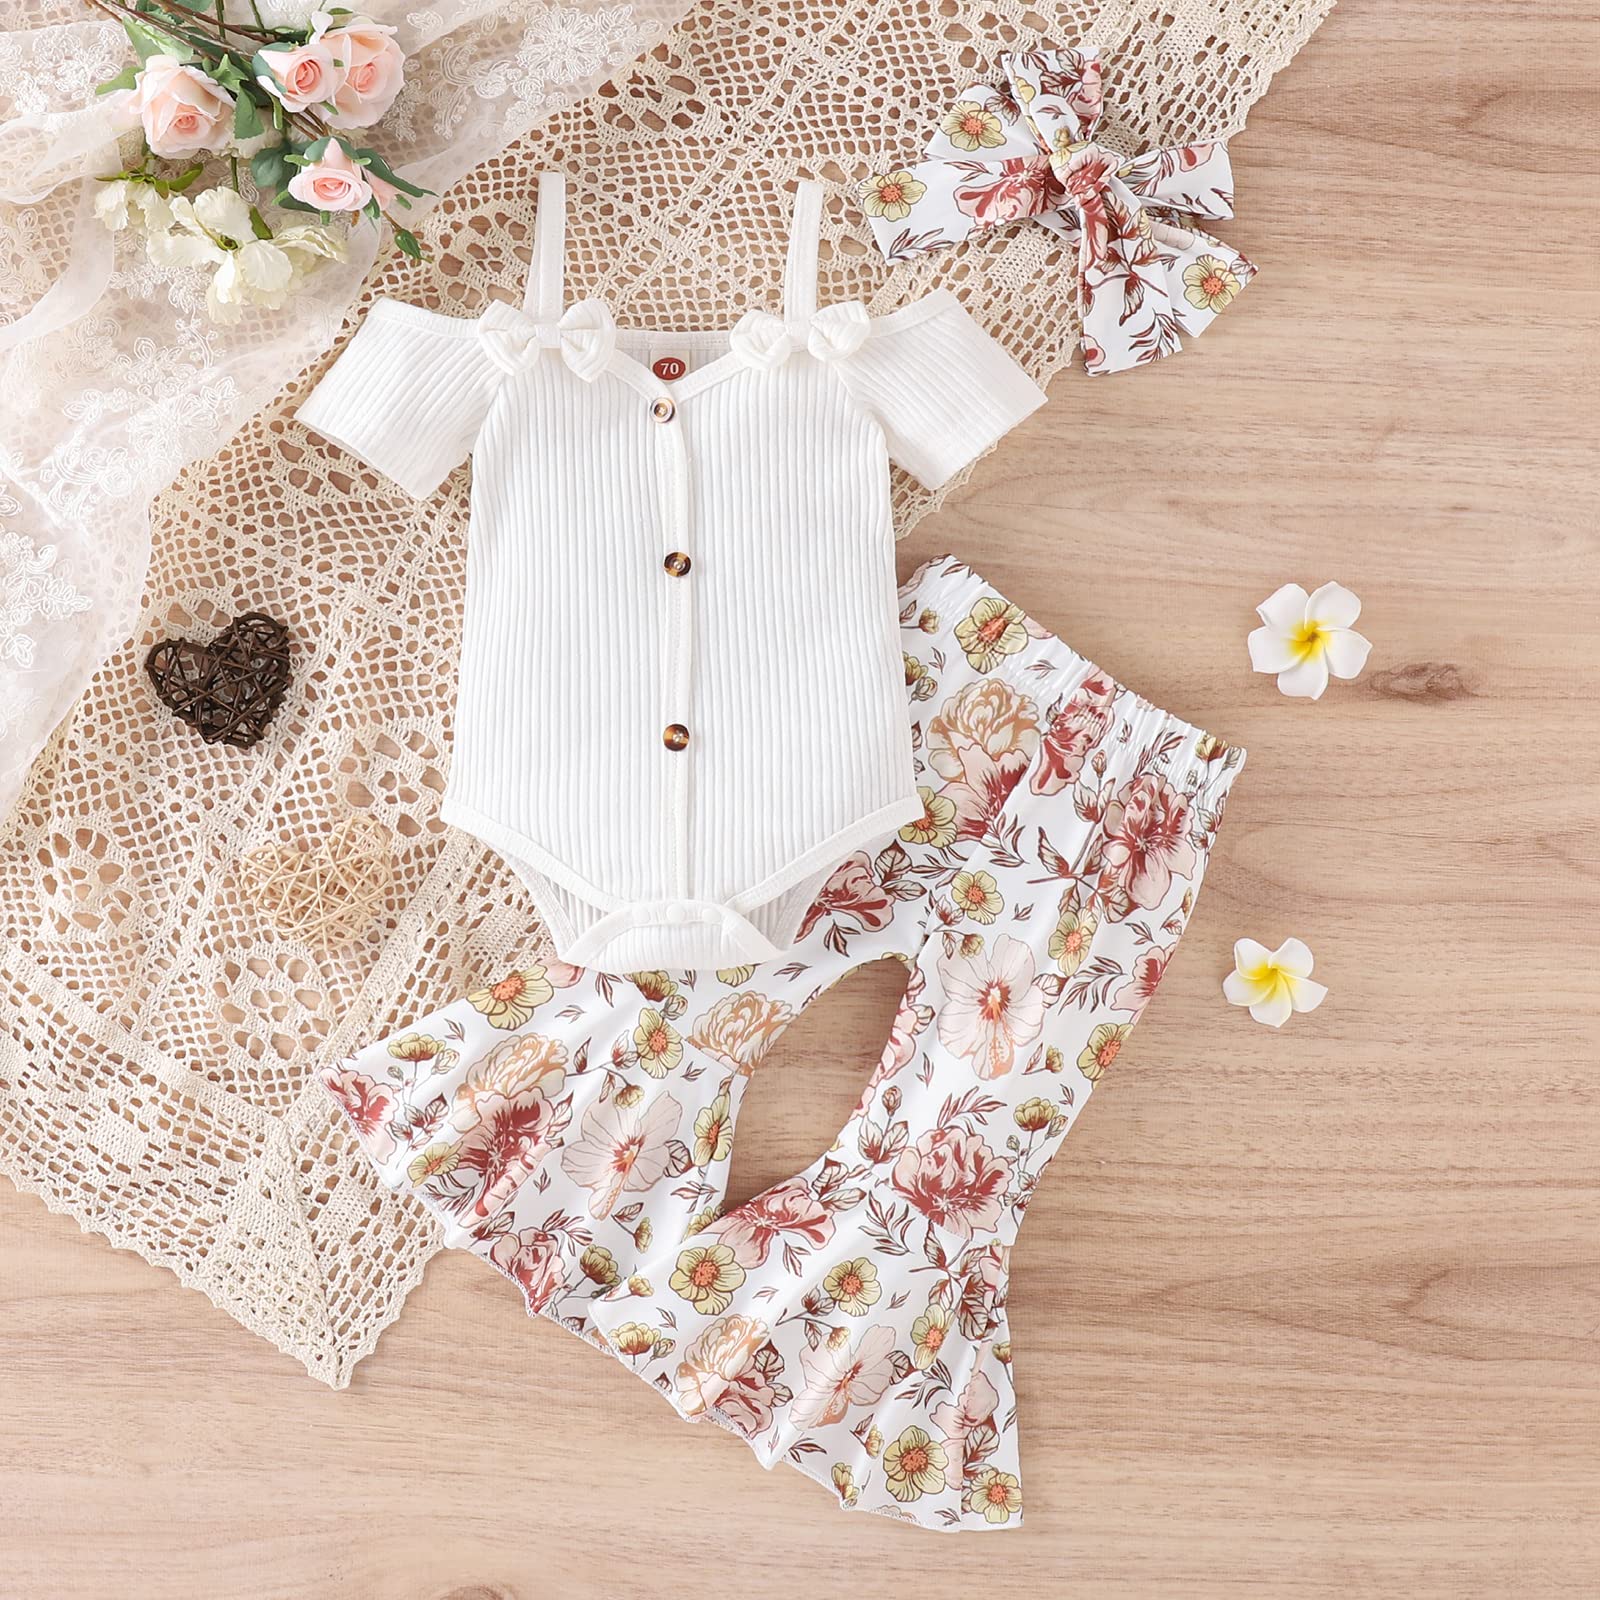 Engofs Newborn Baby Girl Clothes Short Sleeve Romper Flare Pants Headband Set 3Pcs Infant Summer Outfit 0 3 6 12 18 Months